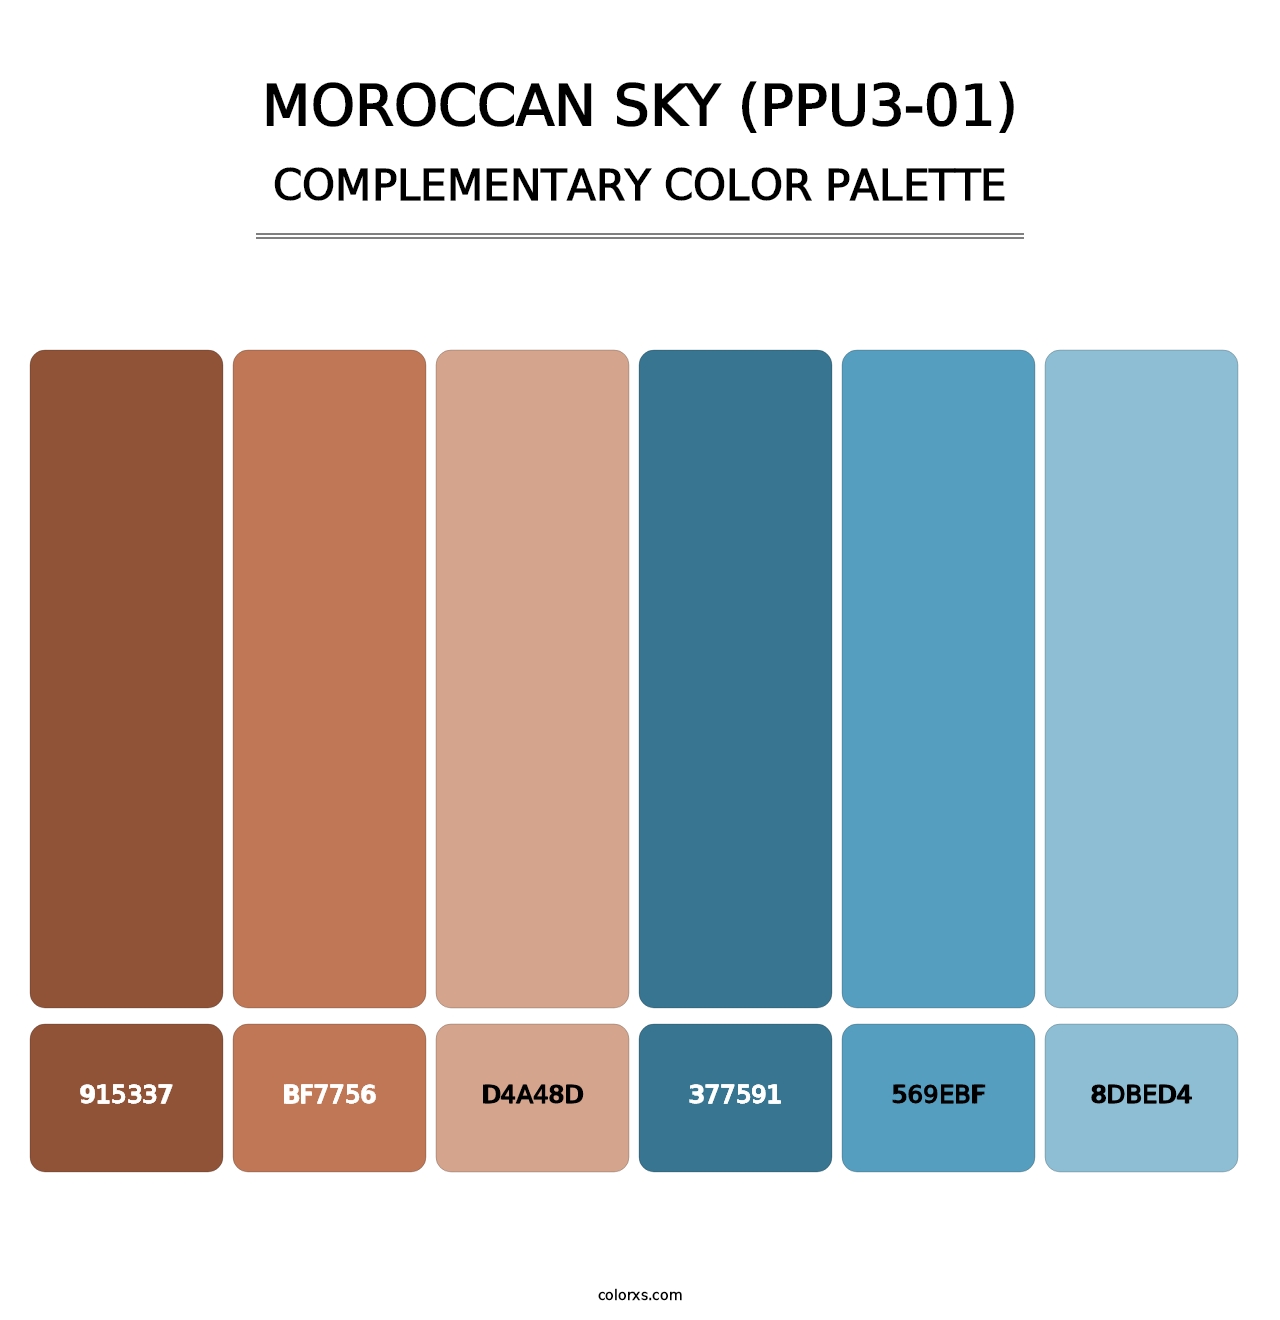 Moroccan Sky (PPU3-01) - Complementary Color Palette